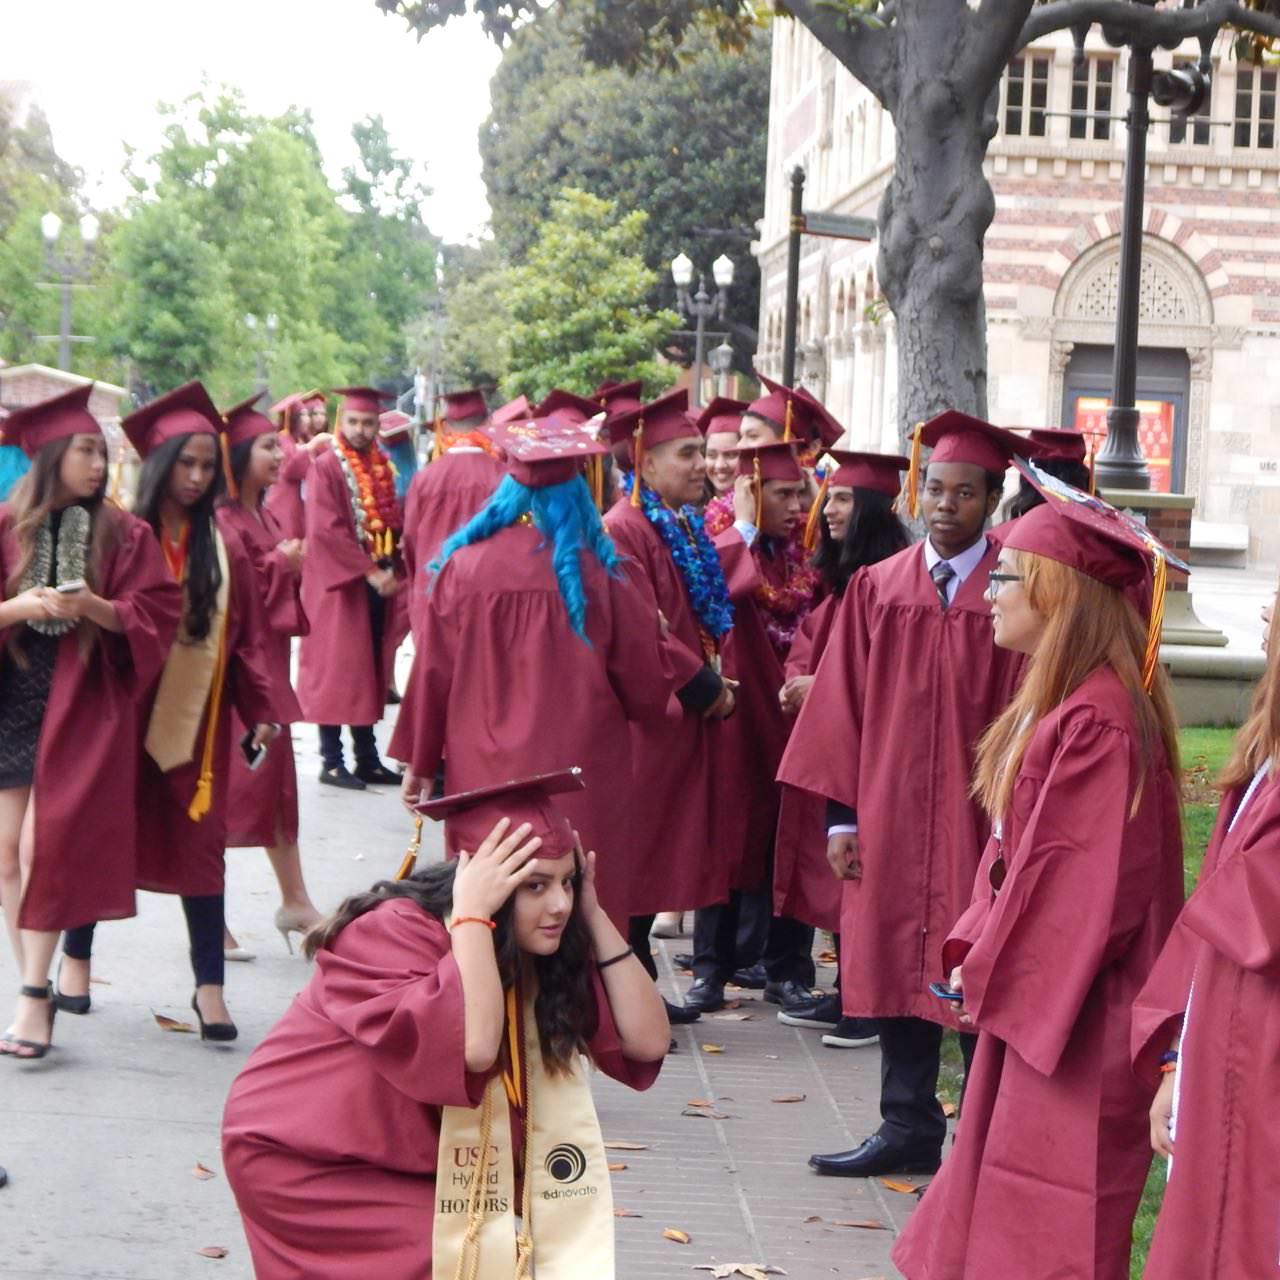 USC Hybrid High graduates its first class, with all 84 heading to ...